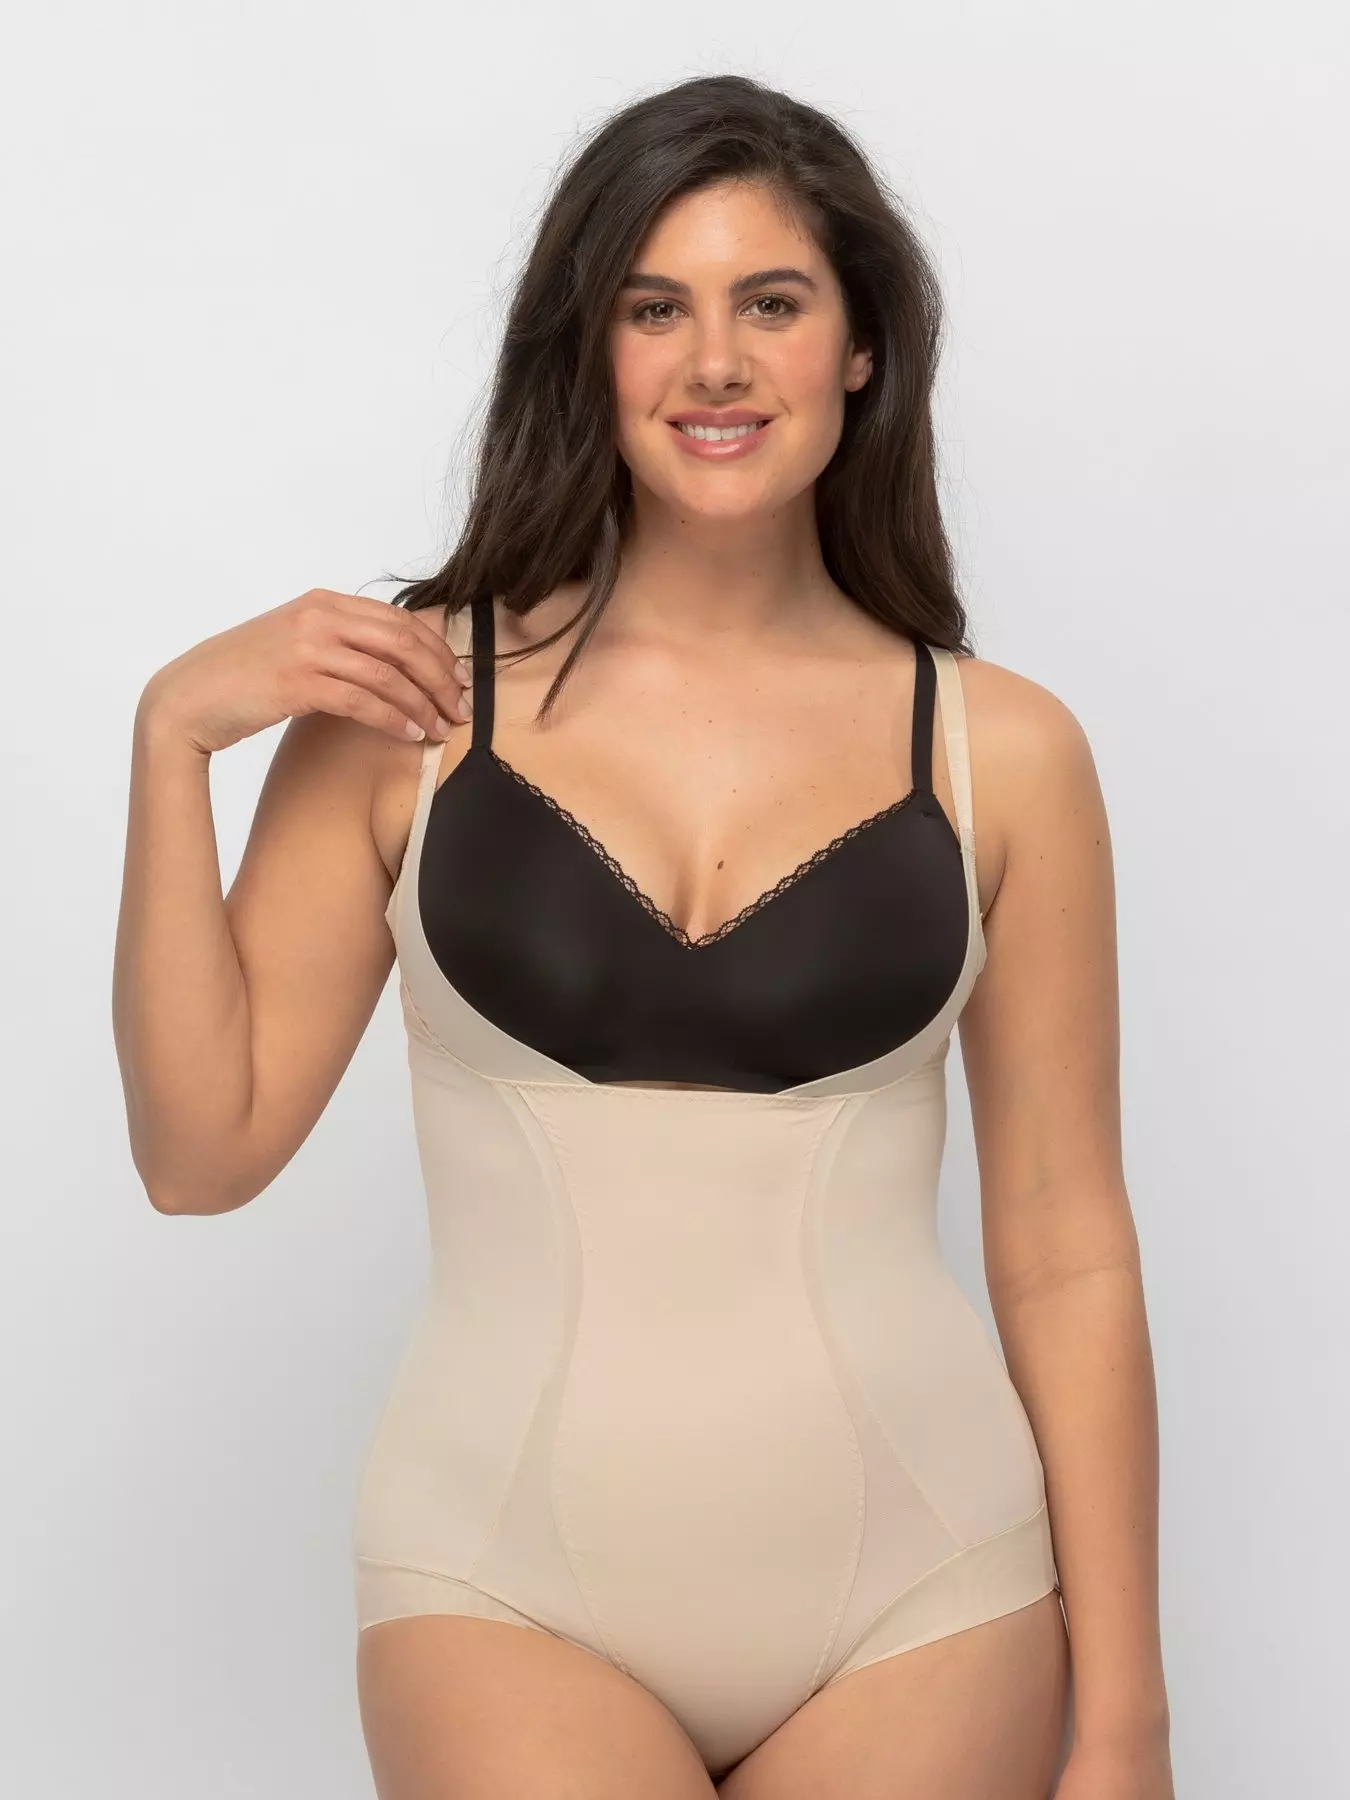 Maidenform Self Expressions Women's Firm Foundations Bodysuit